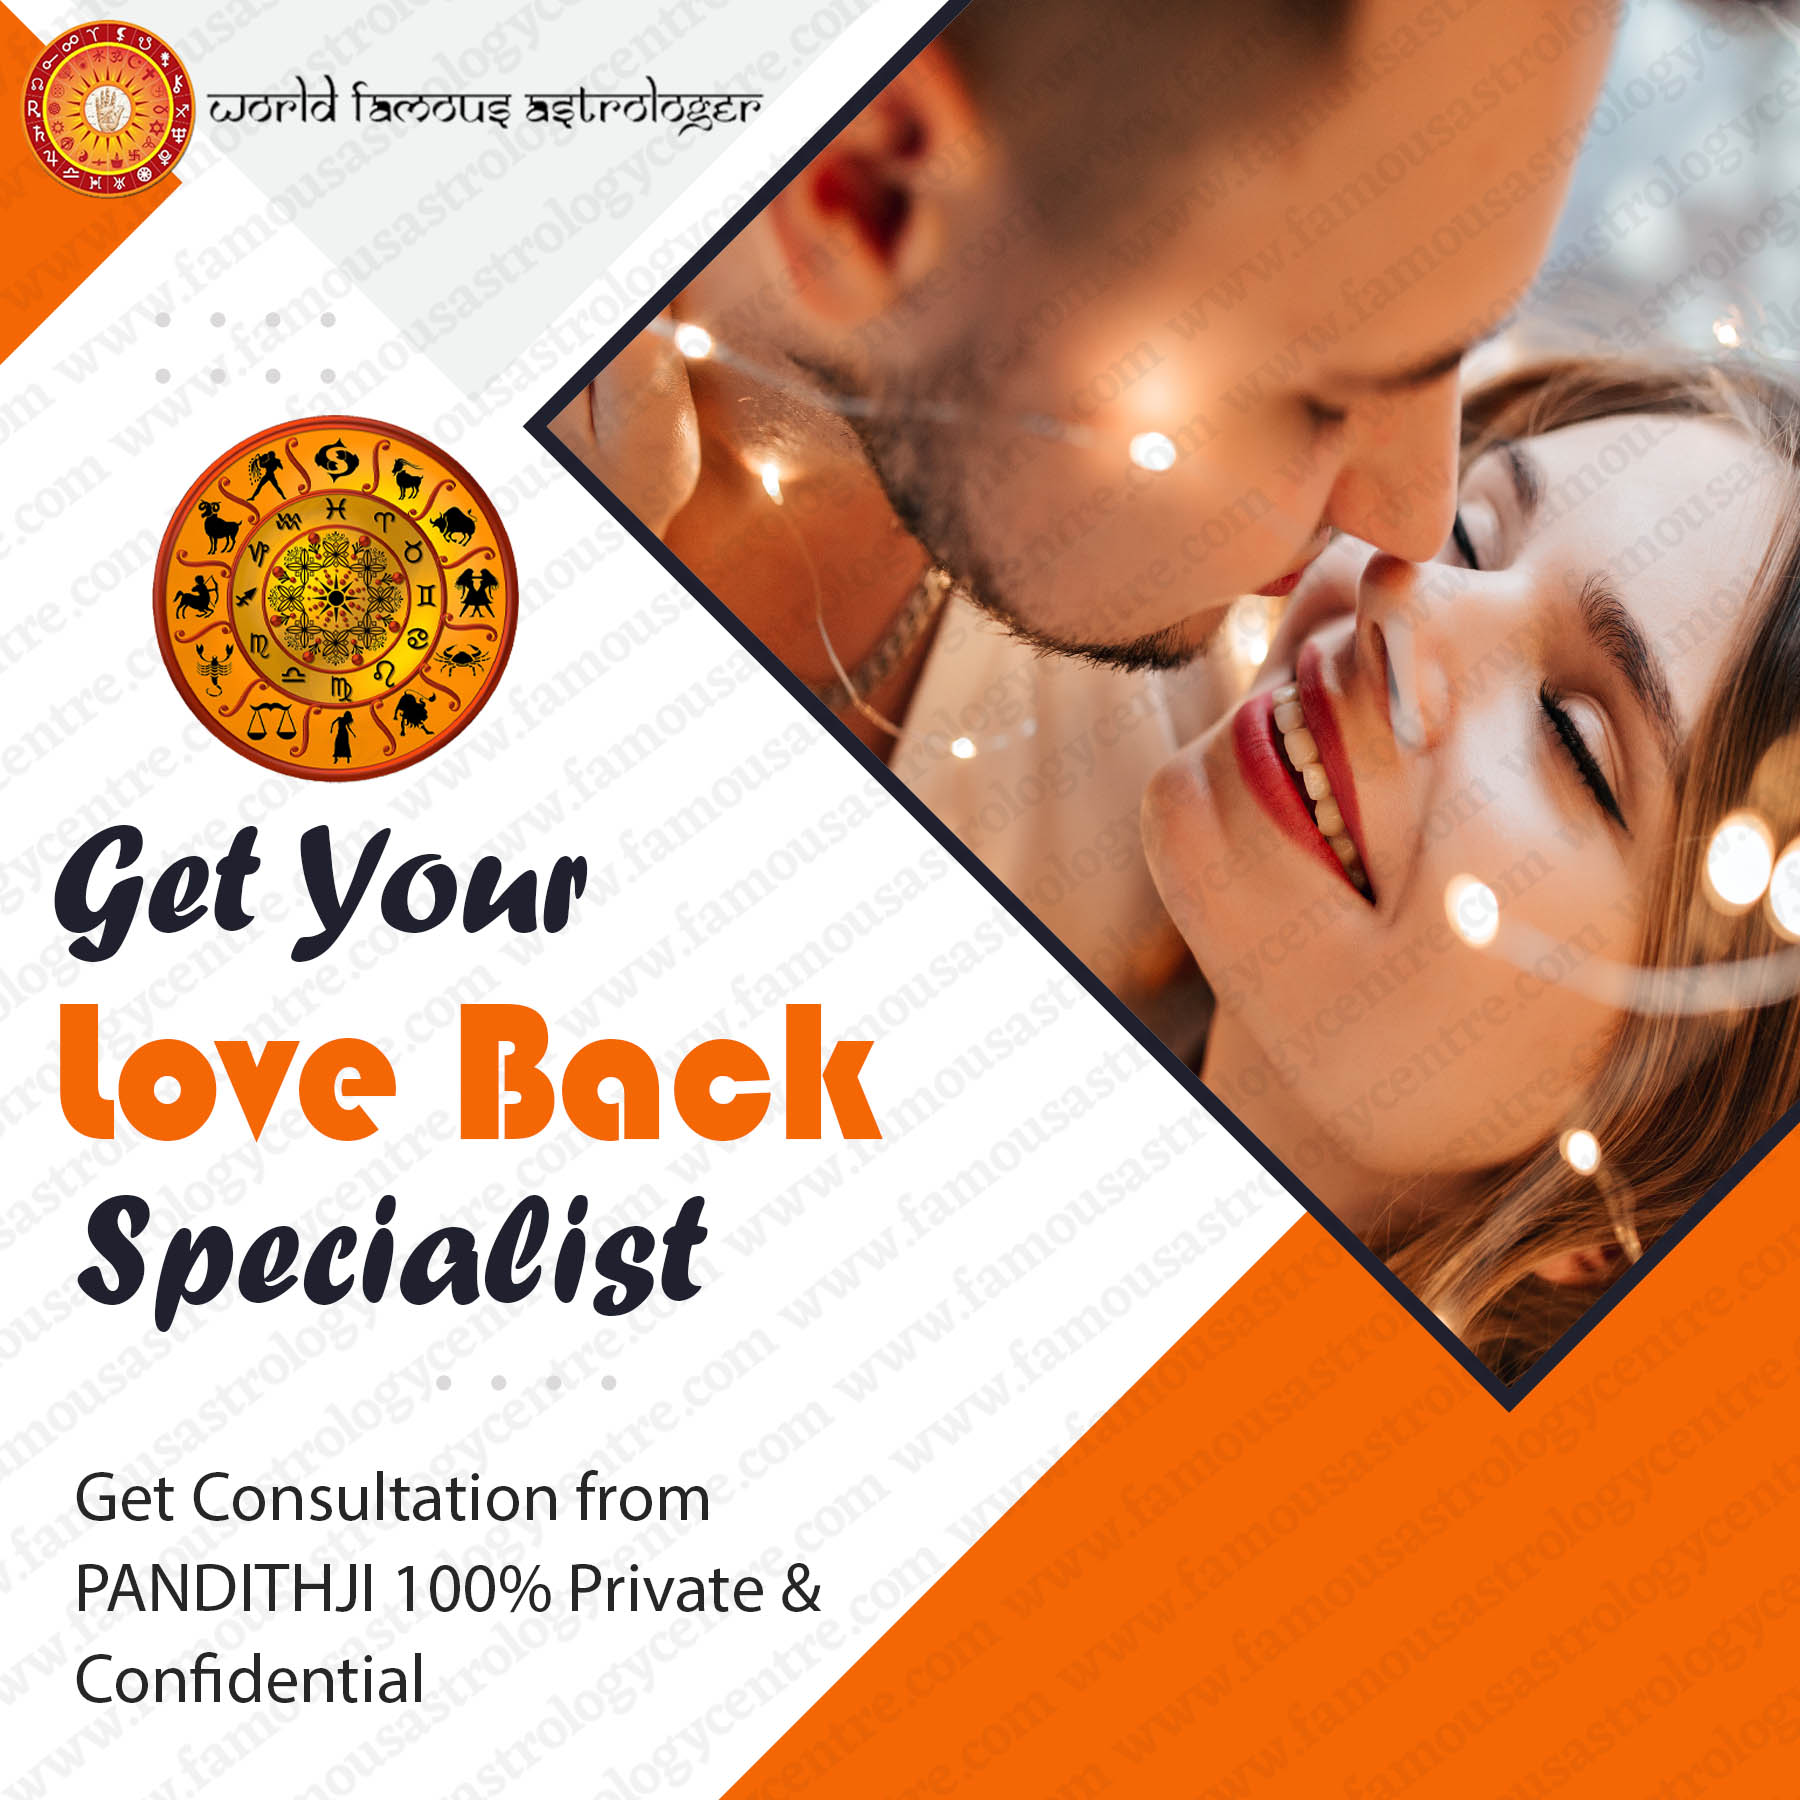 Get Your Love Back Specialist